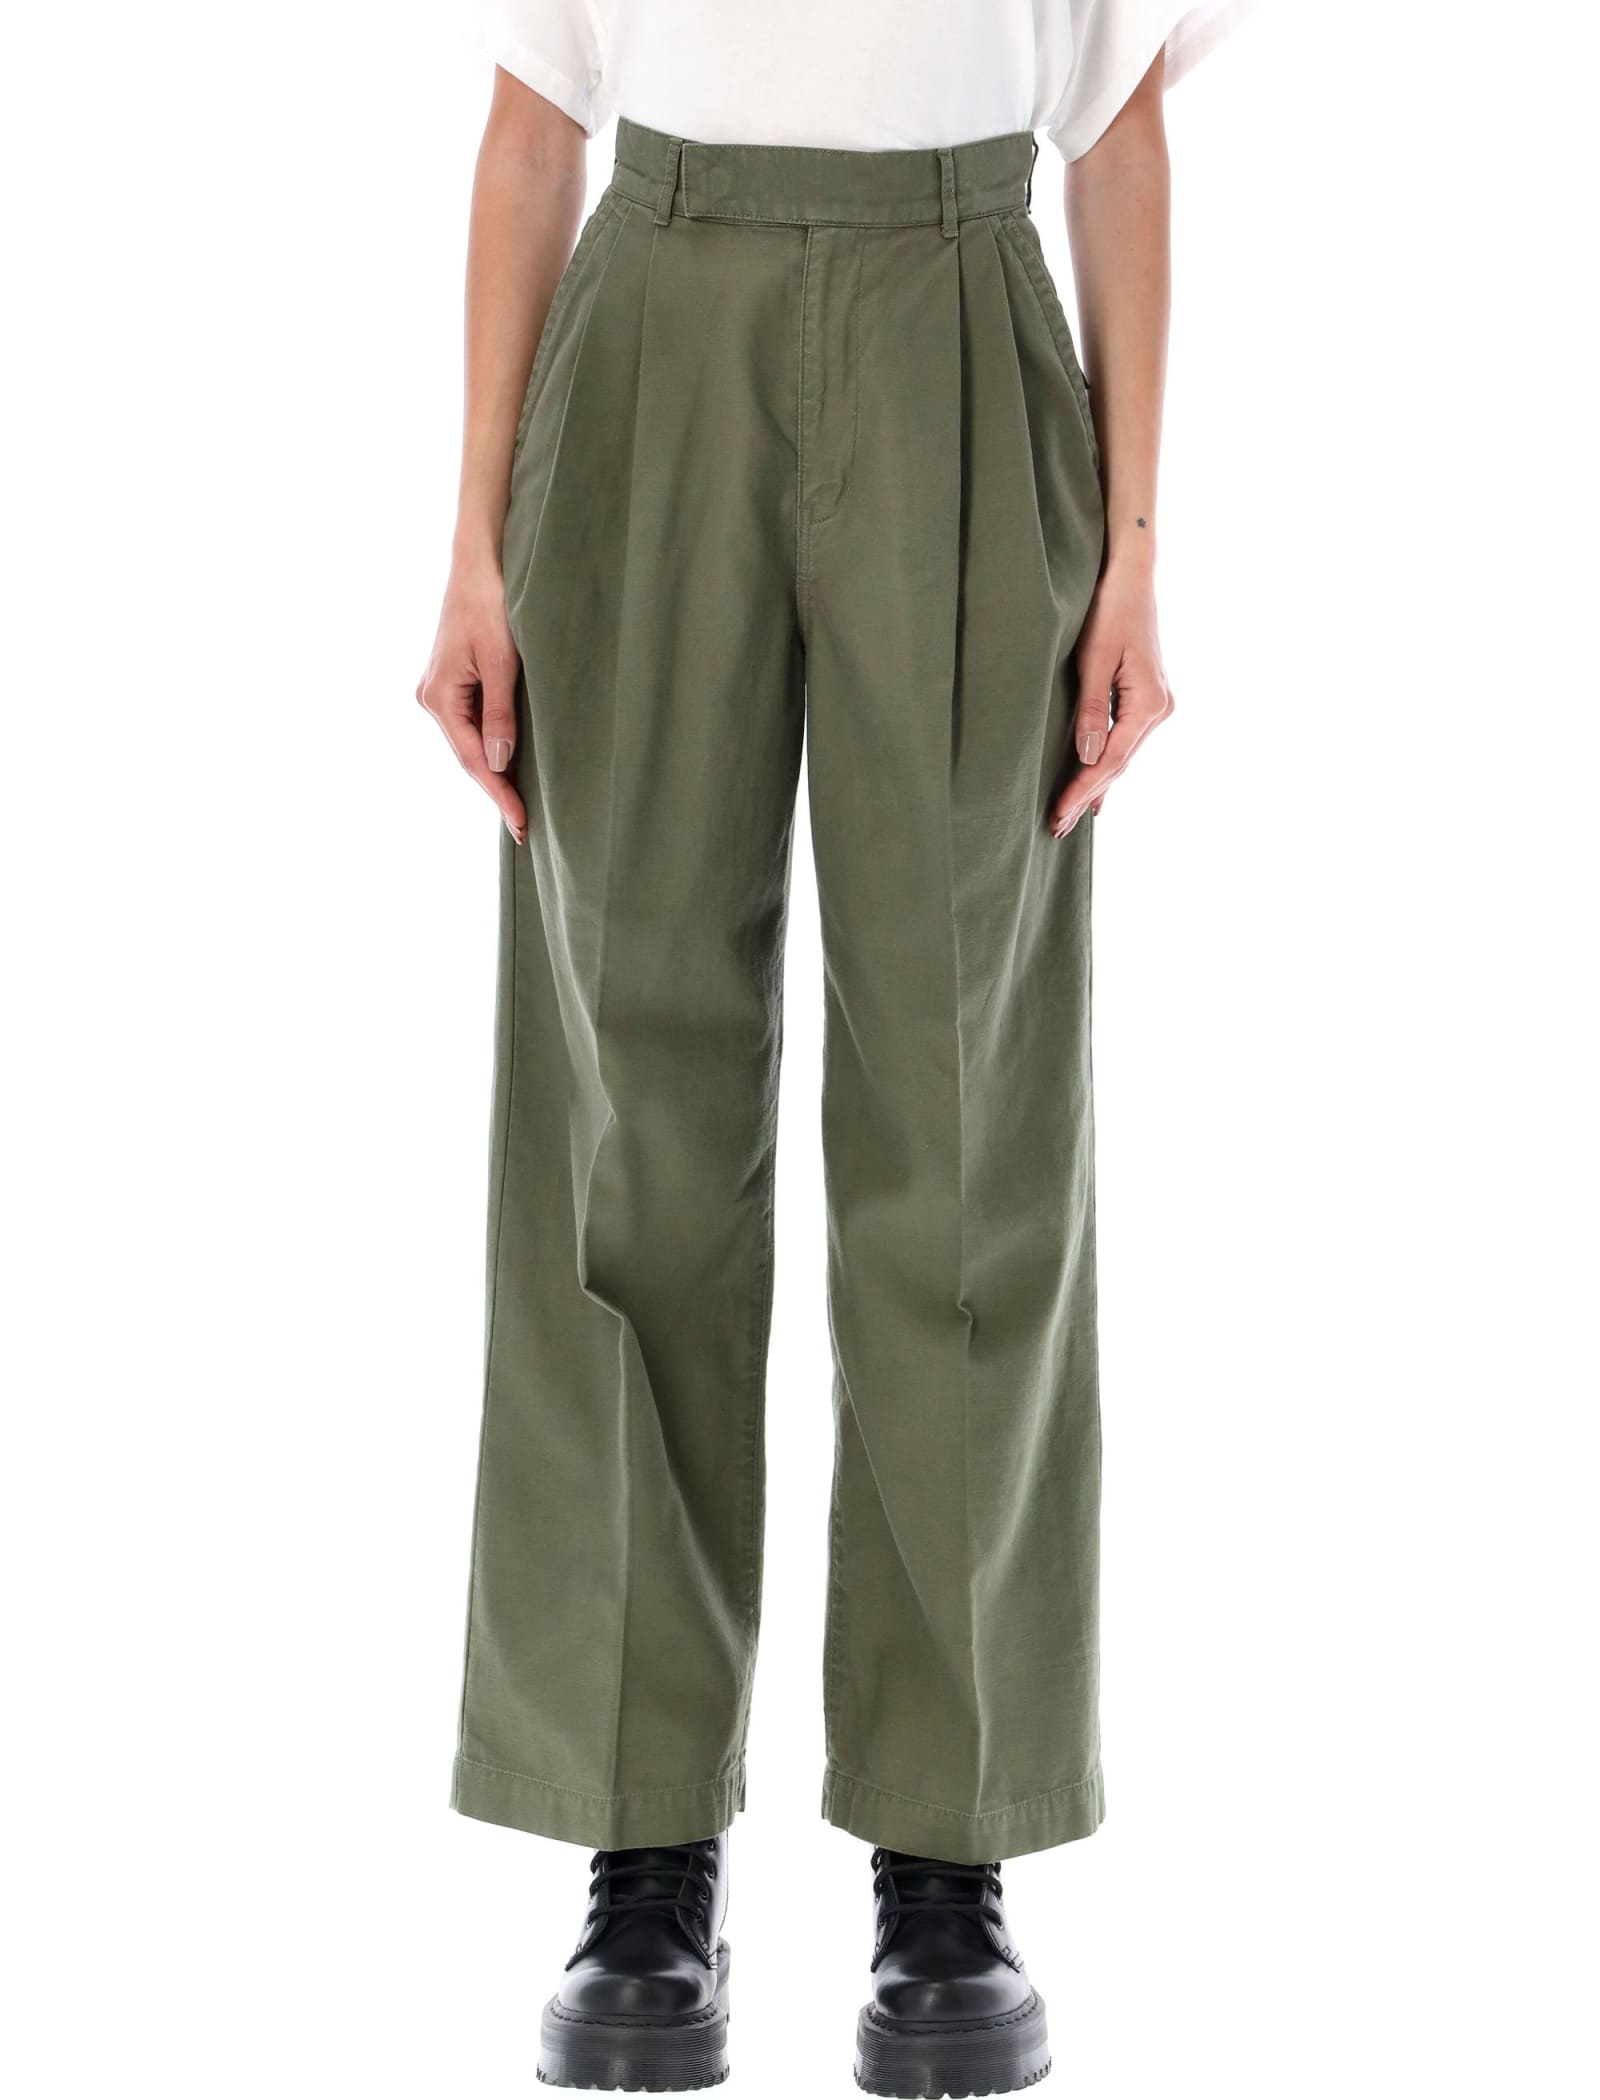 UNDERCOVER CHINO PLEATED PANTS